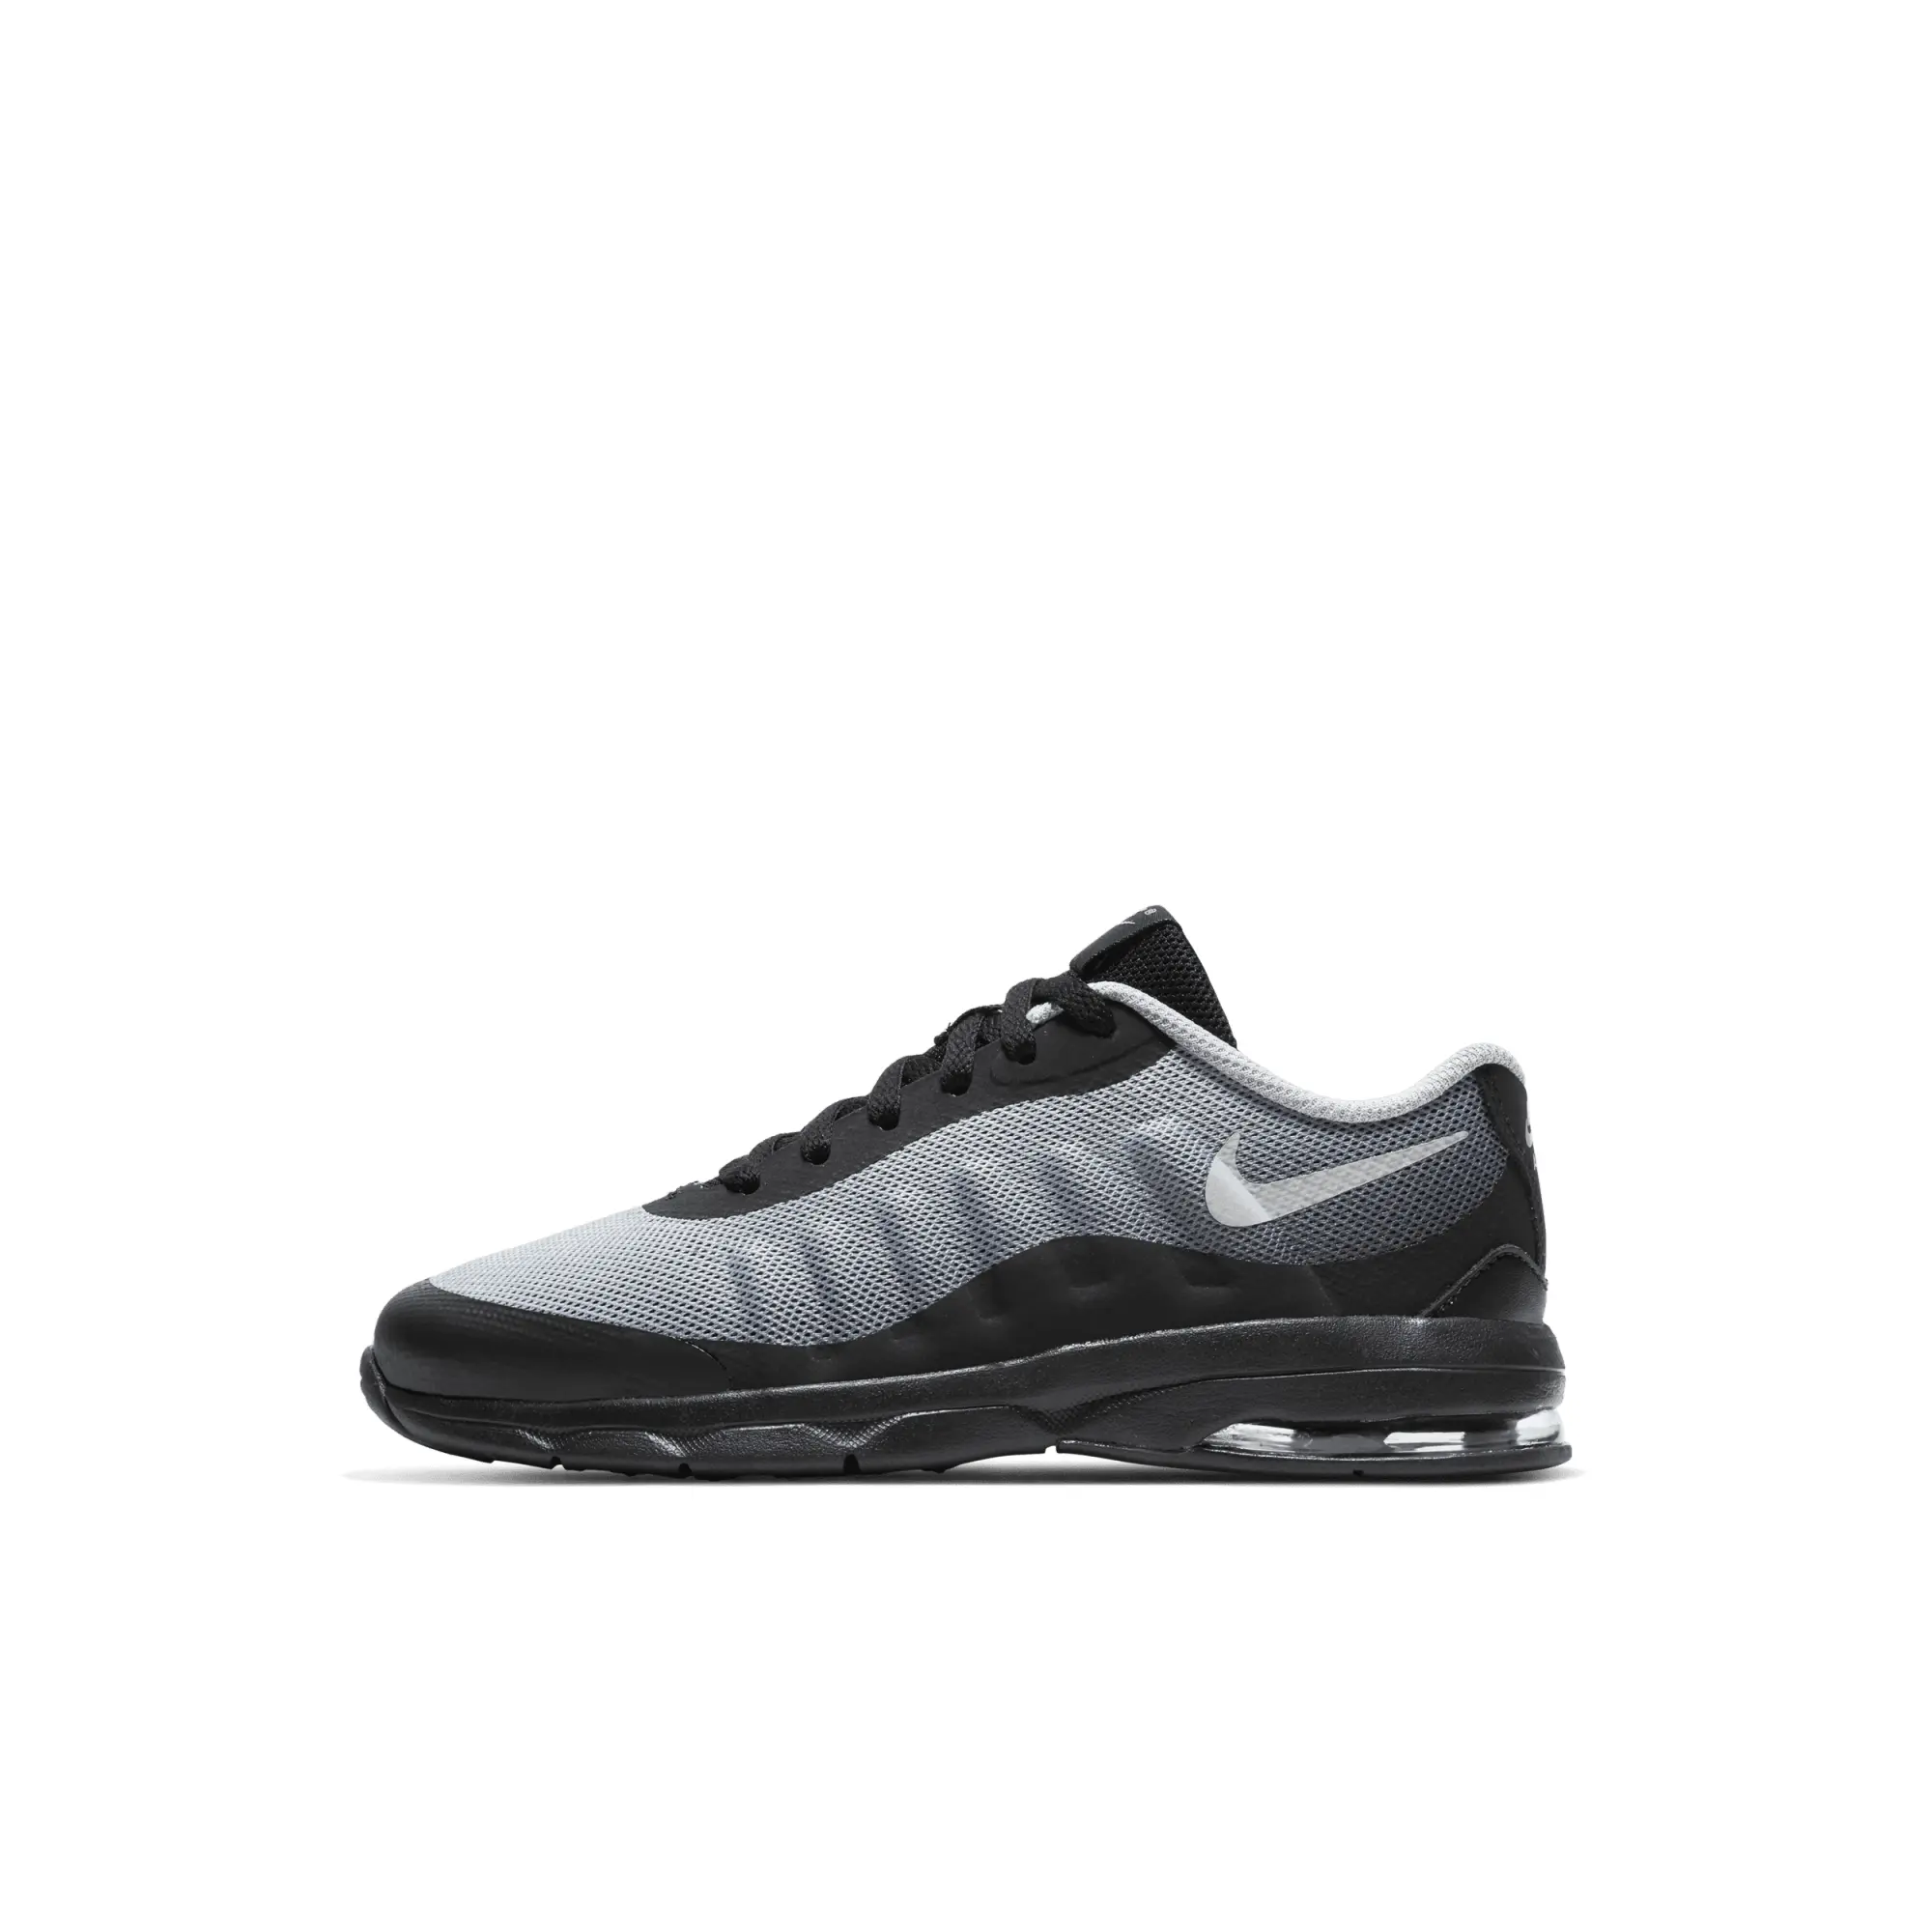 Nike Air Max Invigor Younger Kids' Shoes - Black